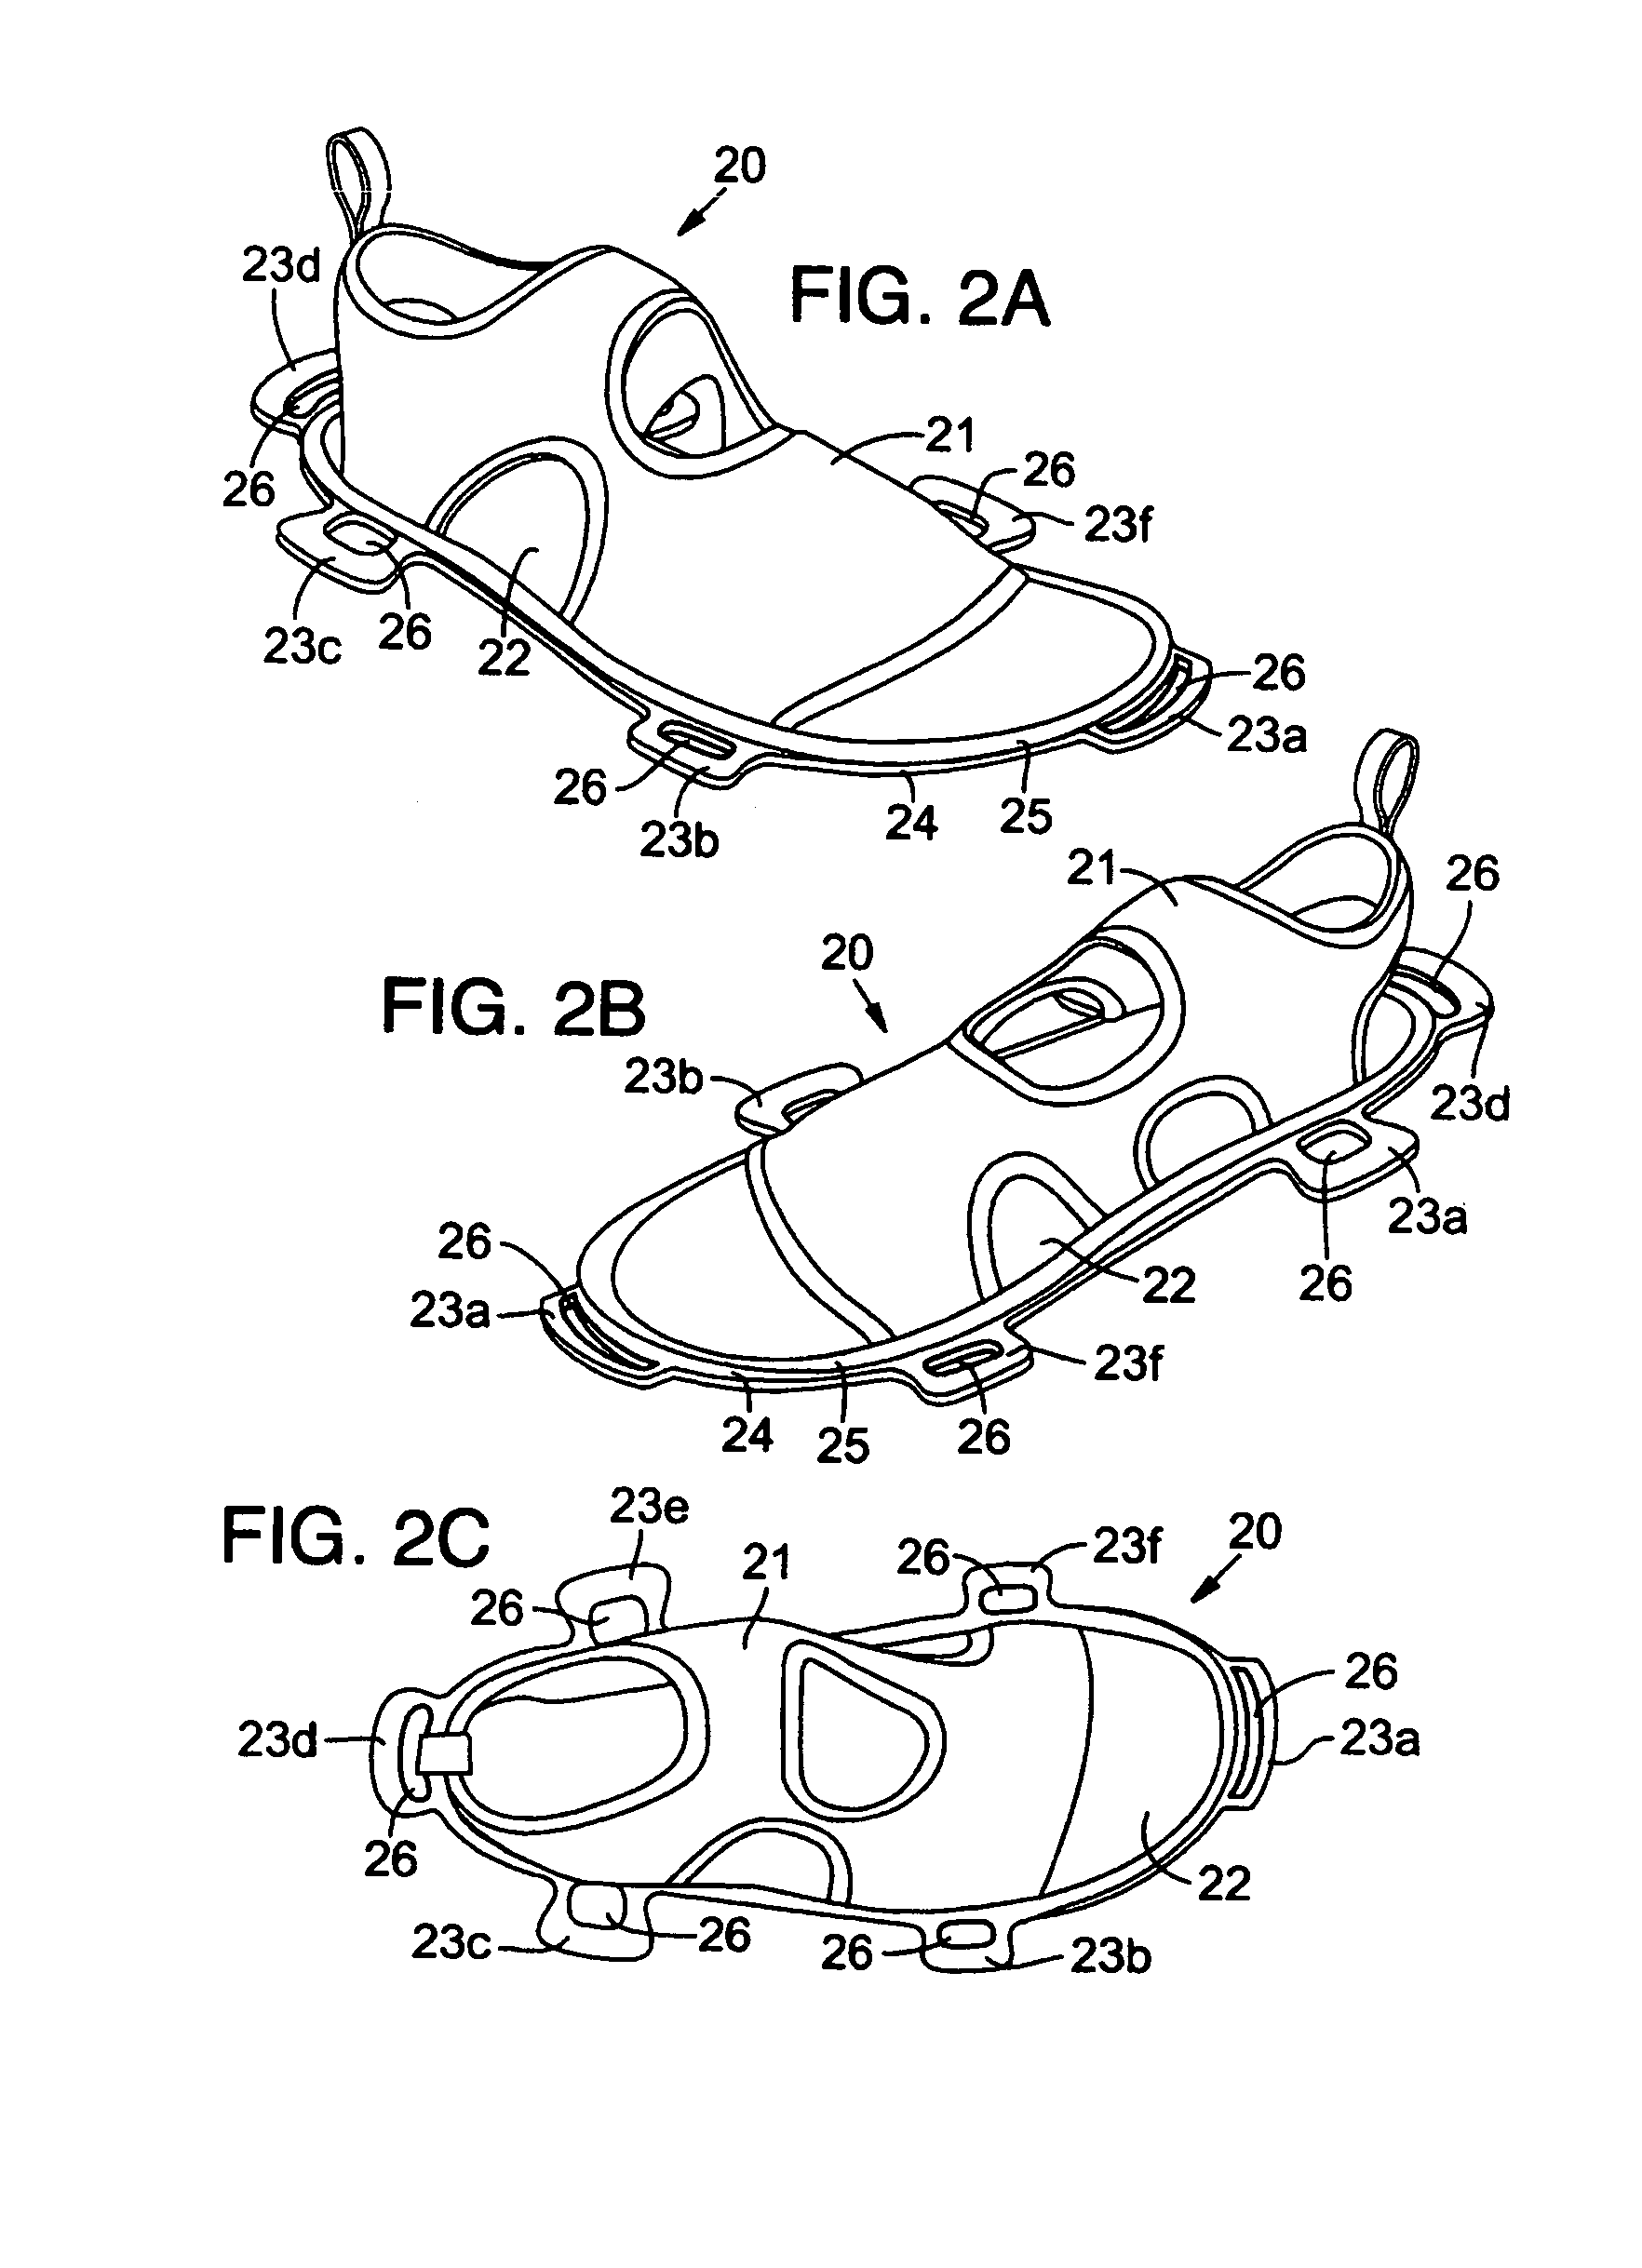 Footwear with a separable foot-receiving portion and sole structure